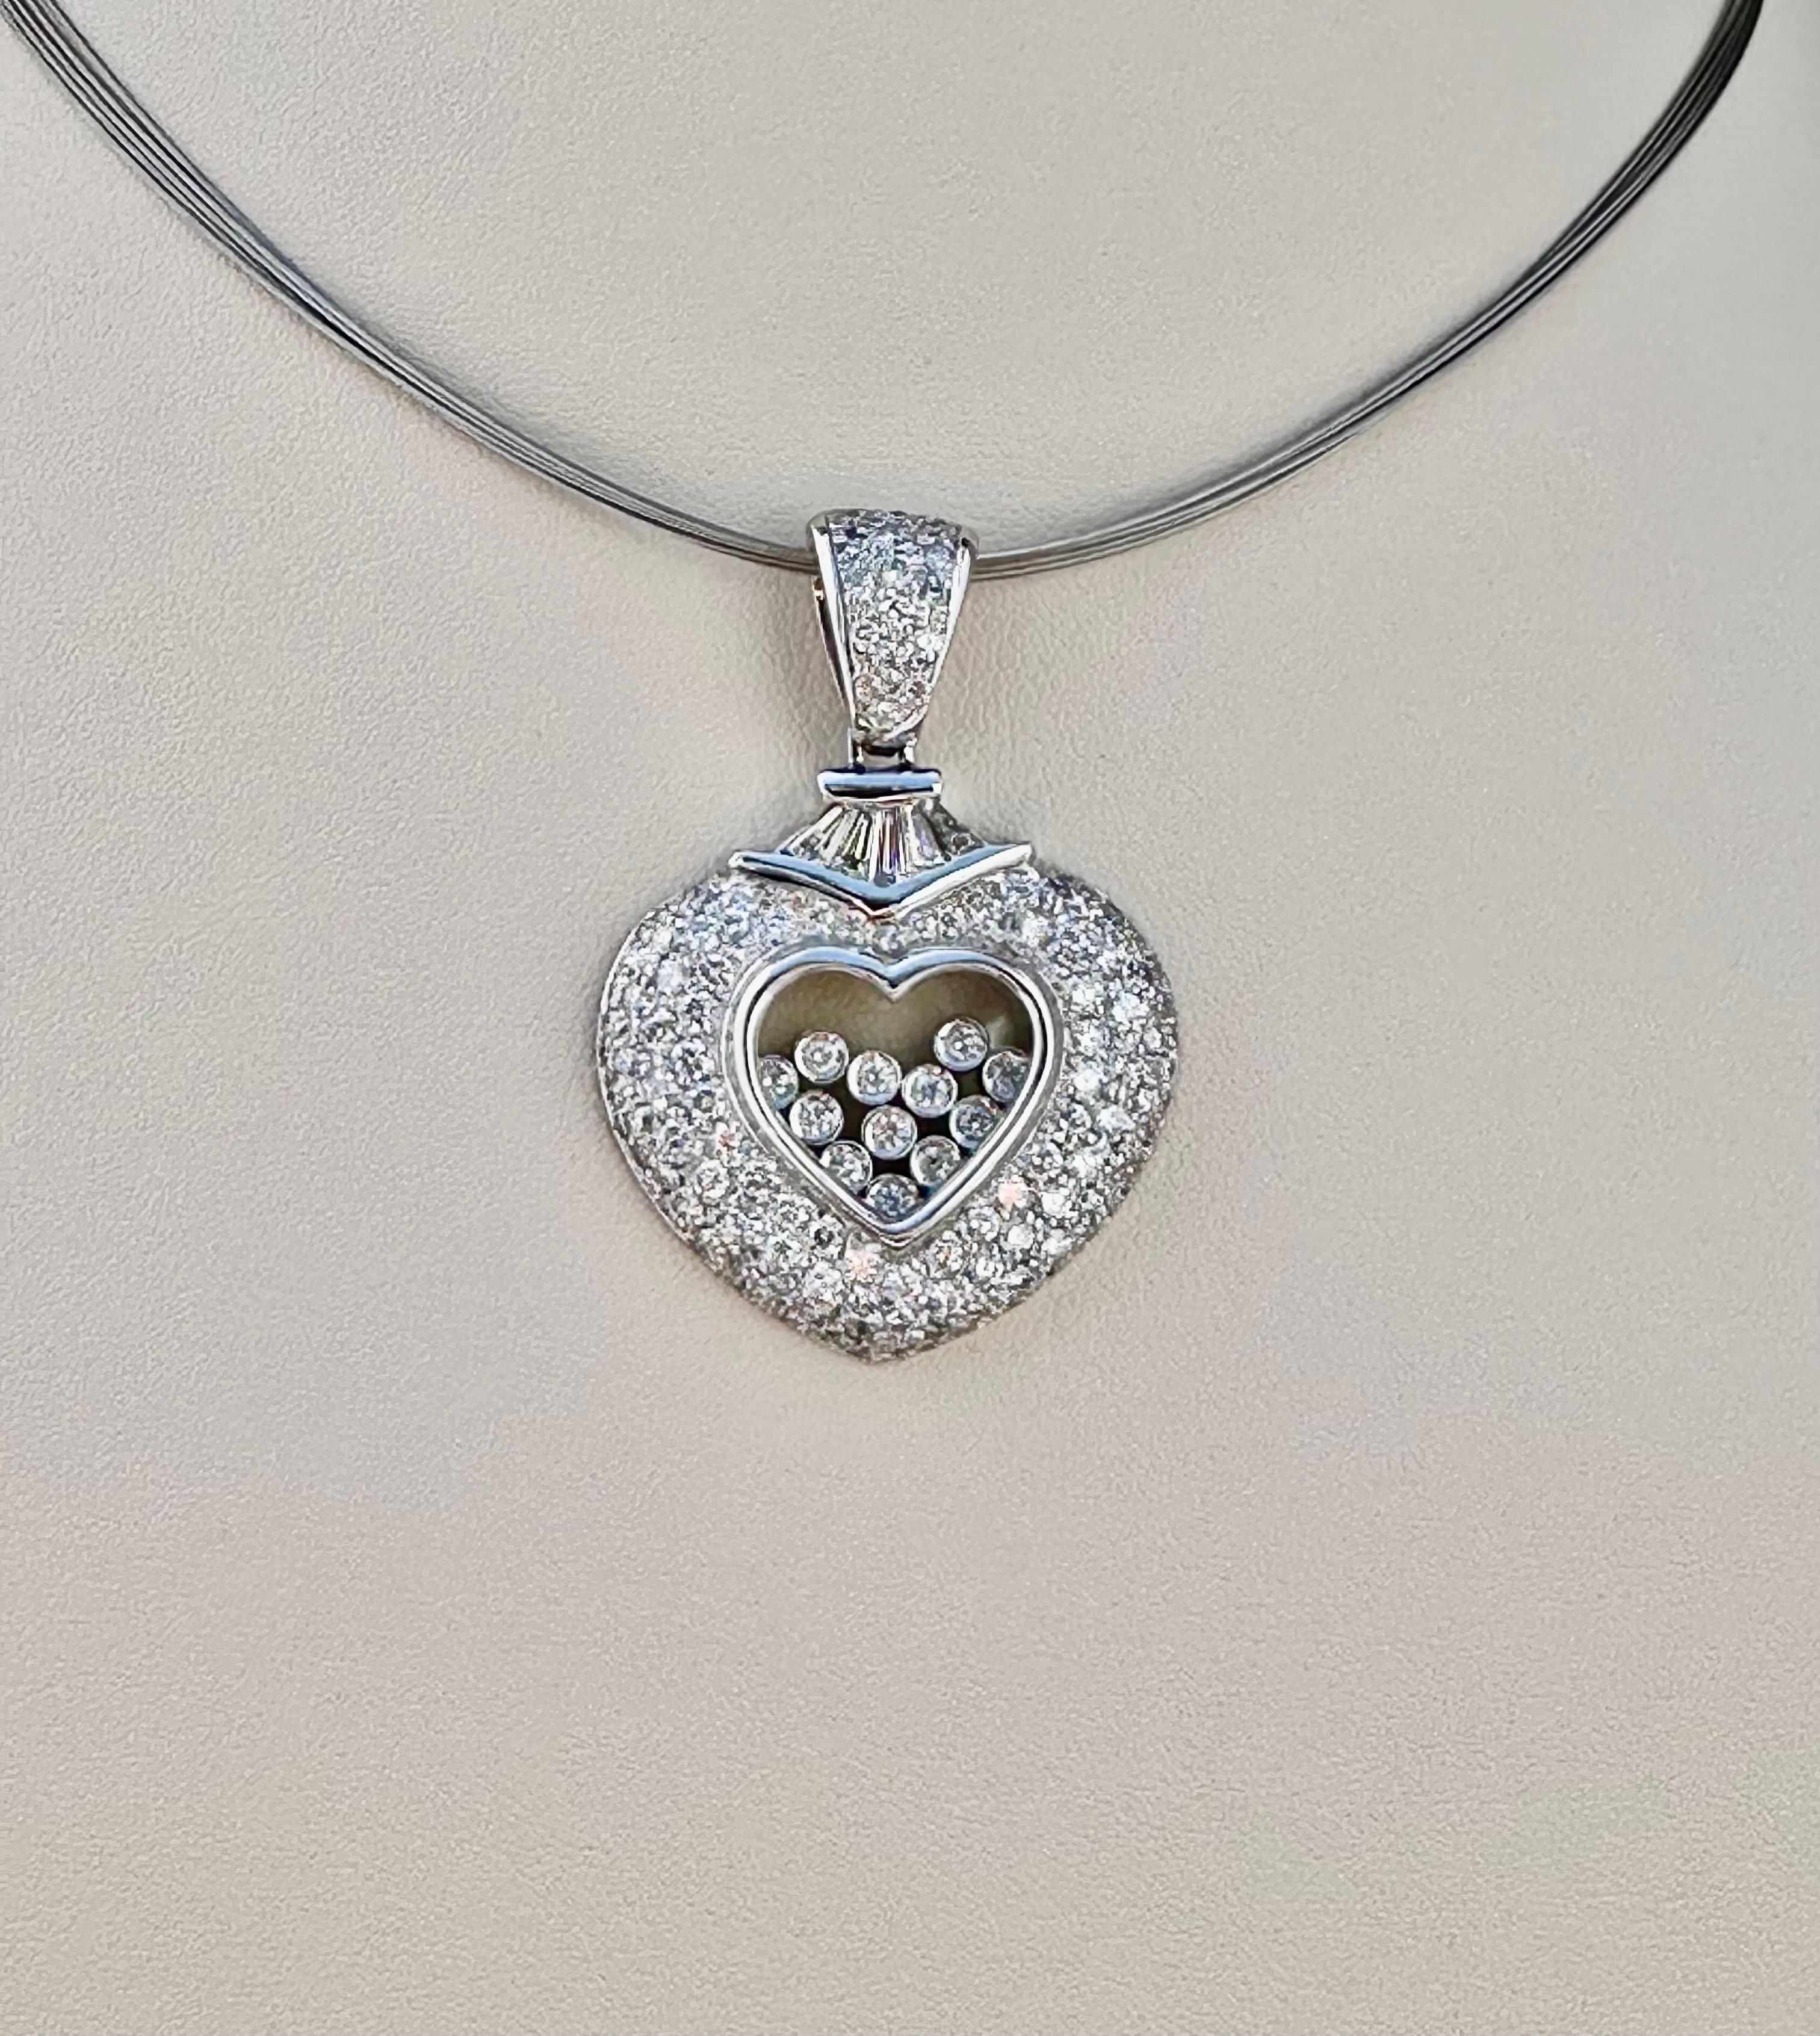 Custom Made Large Heart  Diamond 18K Gold Pendant/Necklace

Description / Condition: Mint. All jewelry has been professionally scrutinized
and cleaned prior to being offered for sale. 

Gender: Woman

Manufacturer: A Step Back in Time

Model: